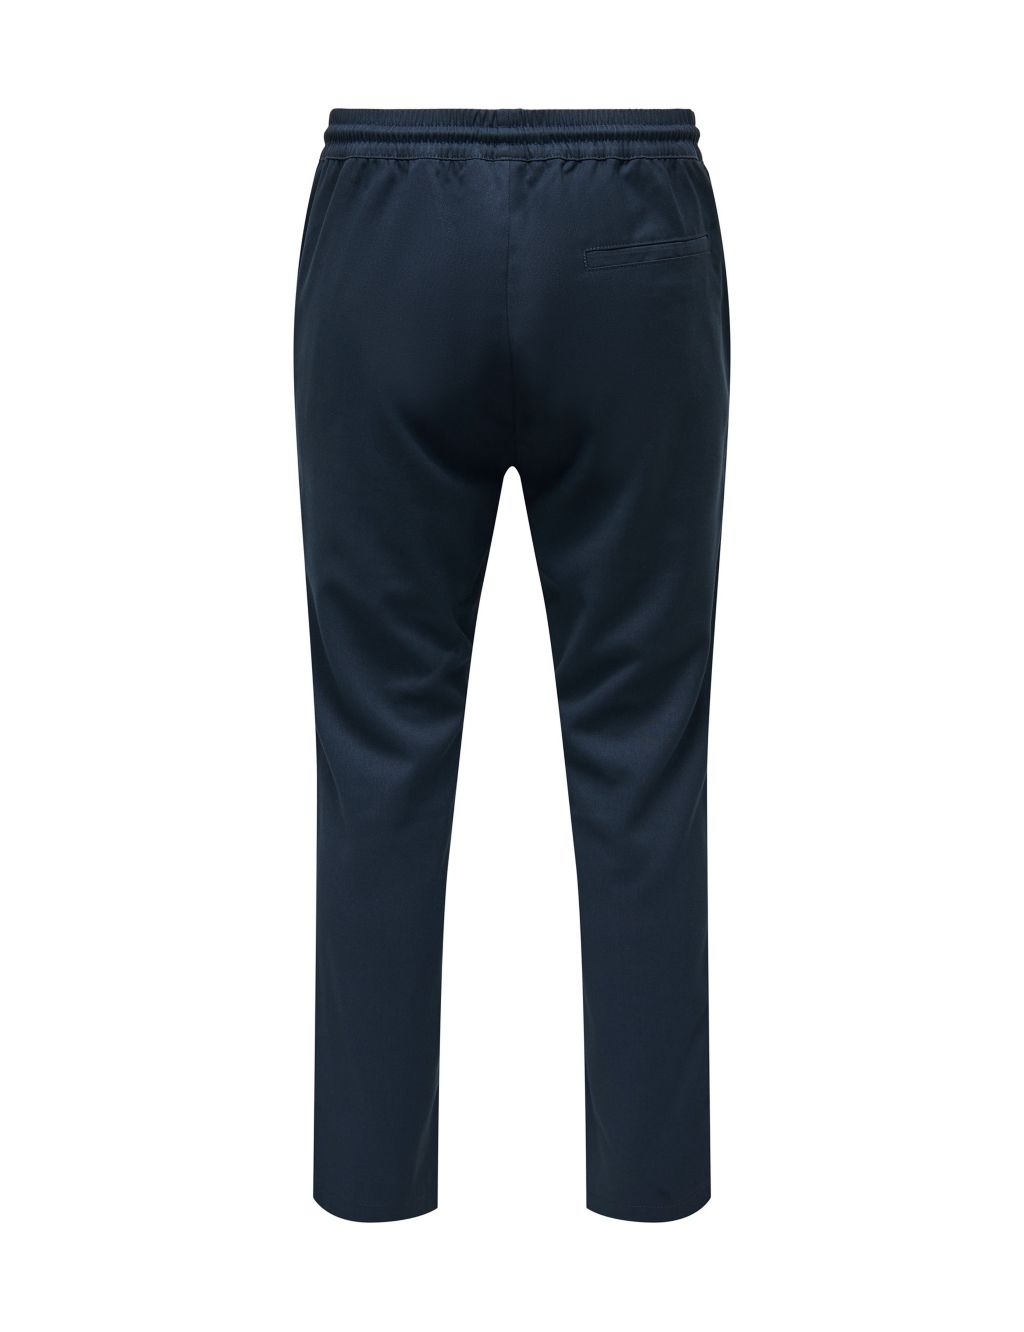 Tapered Fit Elasticated Waist Chinos image 2